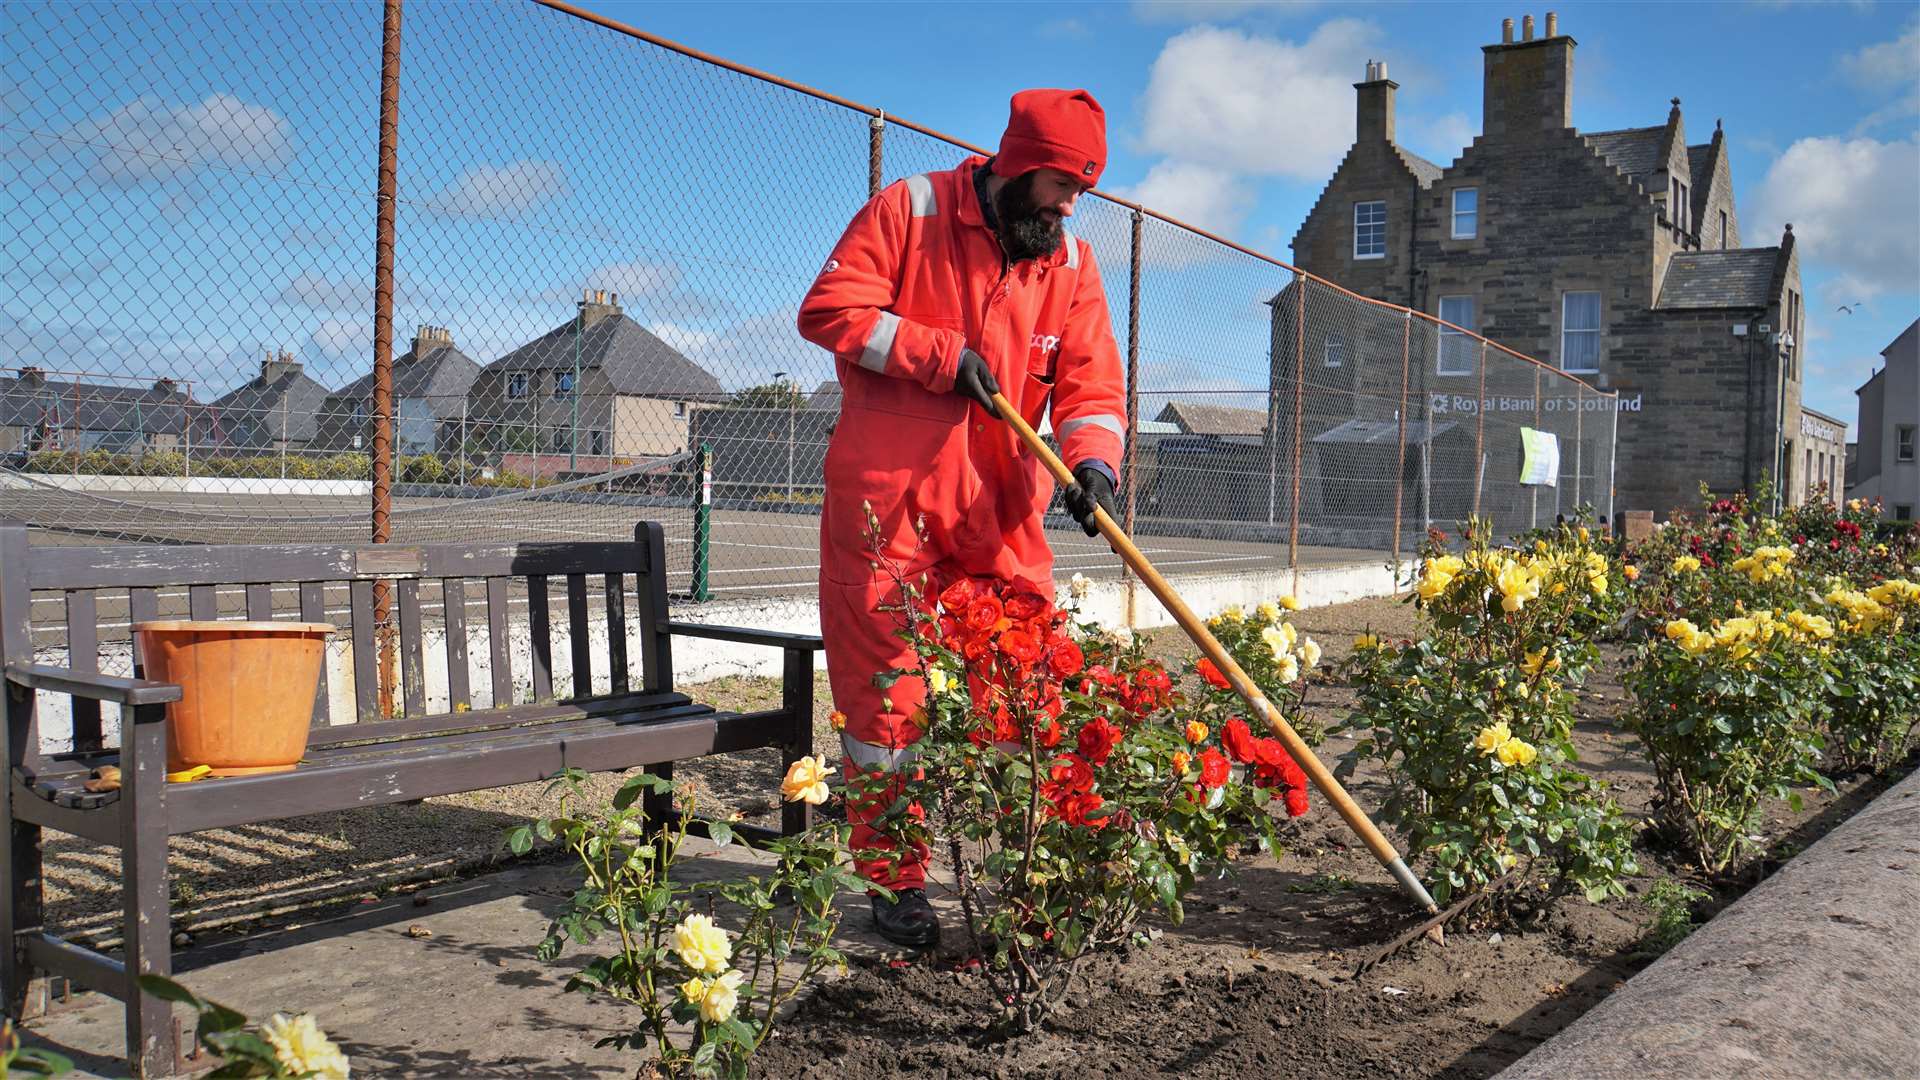 Alexander Glasgow tends the roses in Thurso's town centre. Picture: DGS